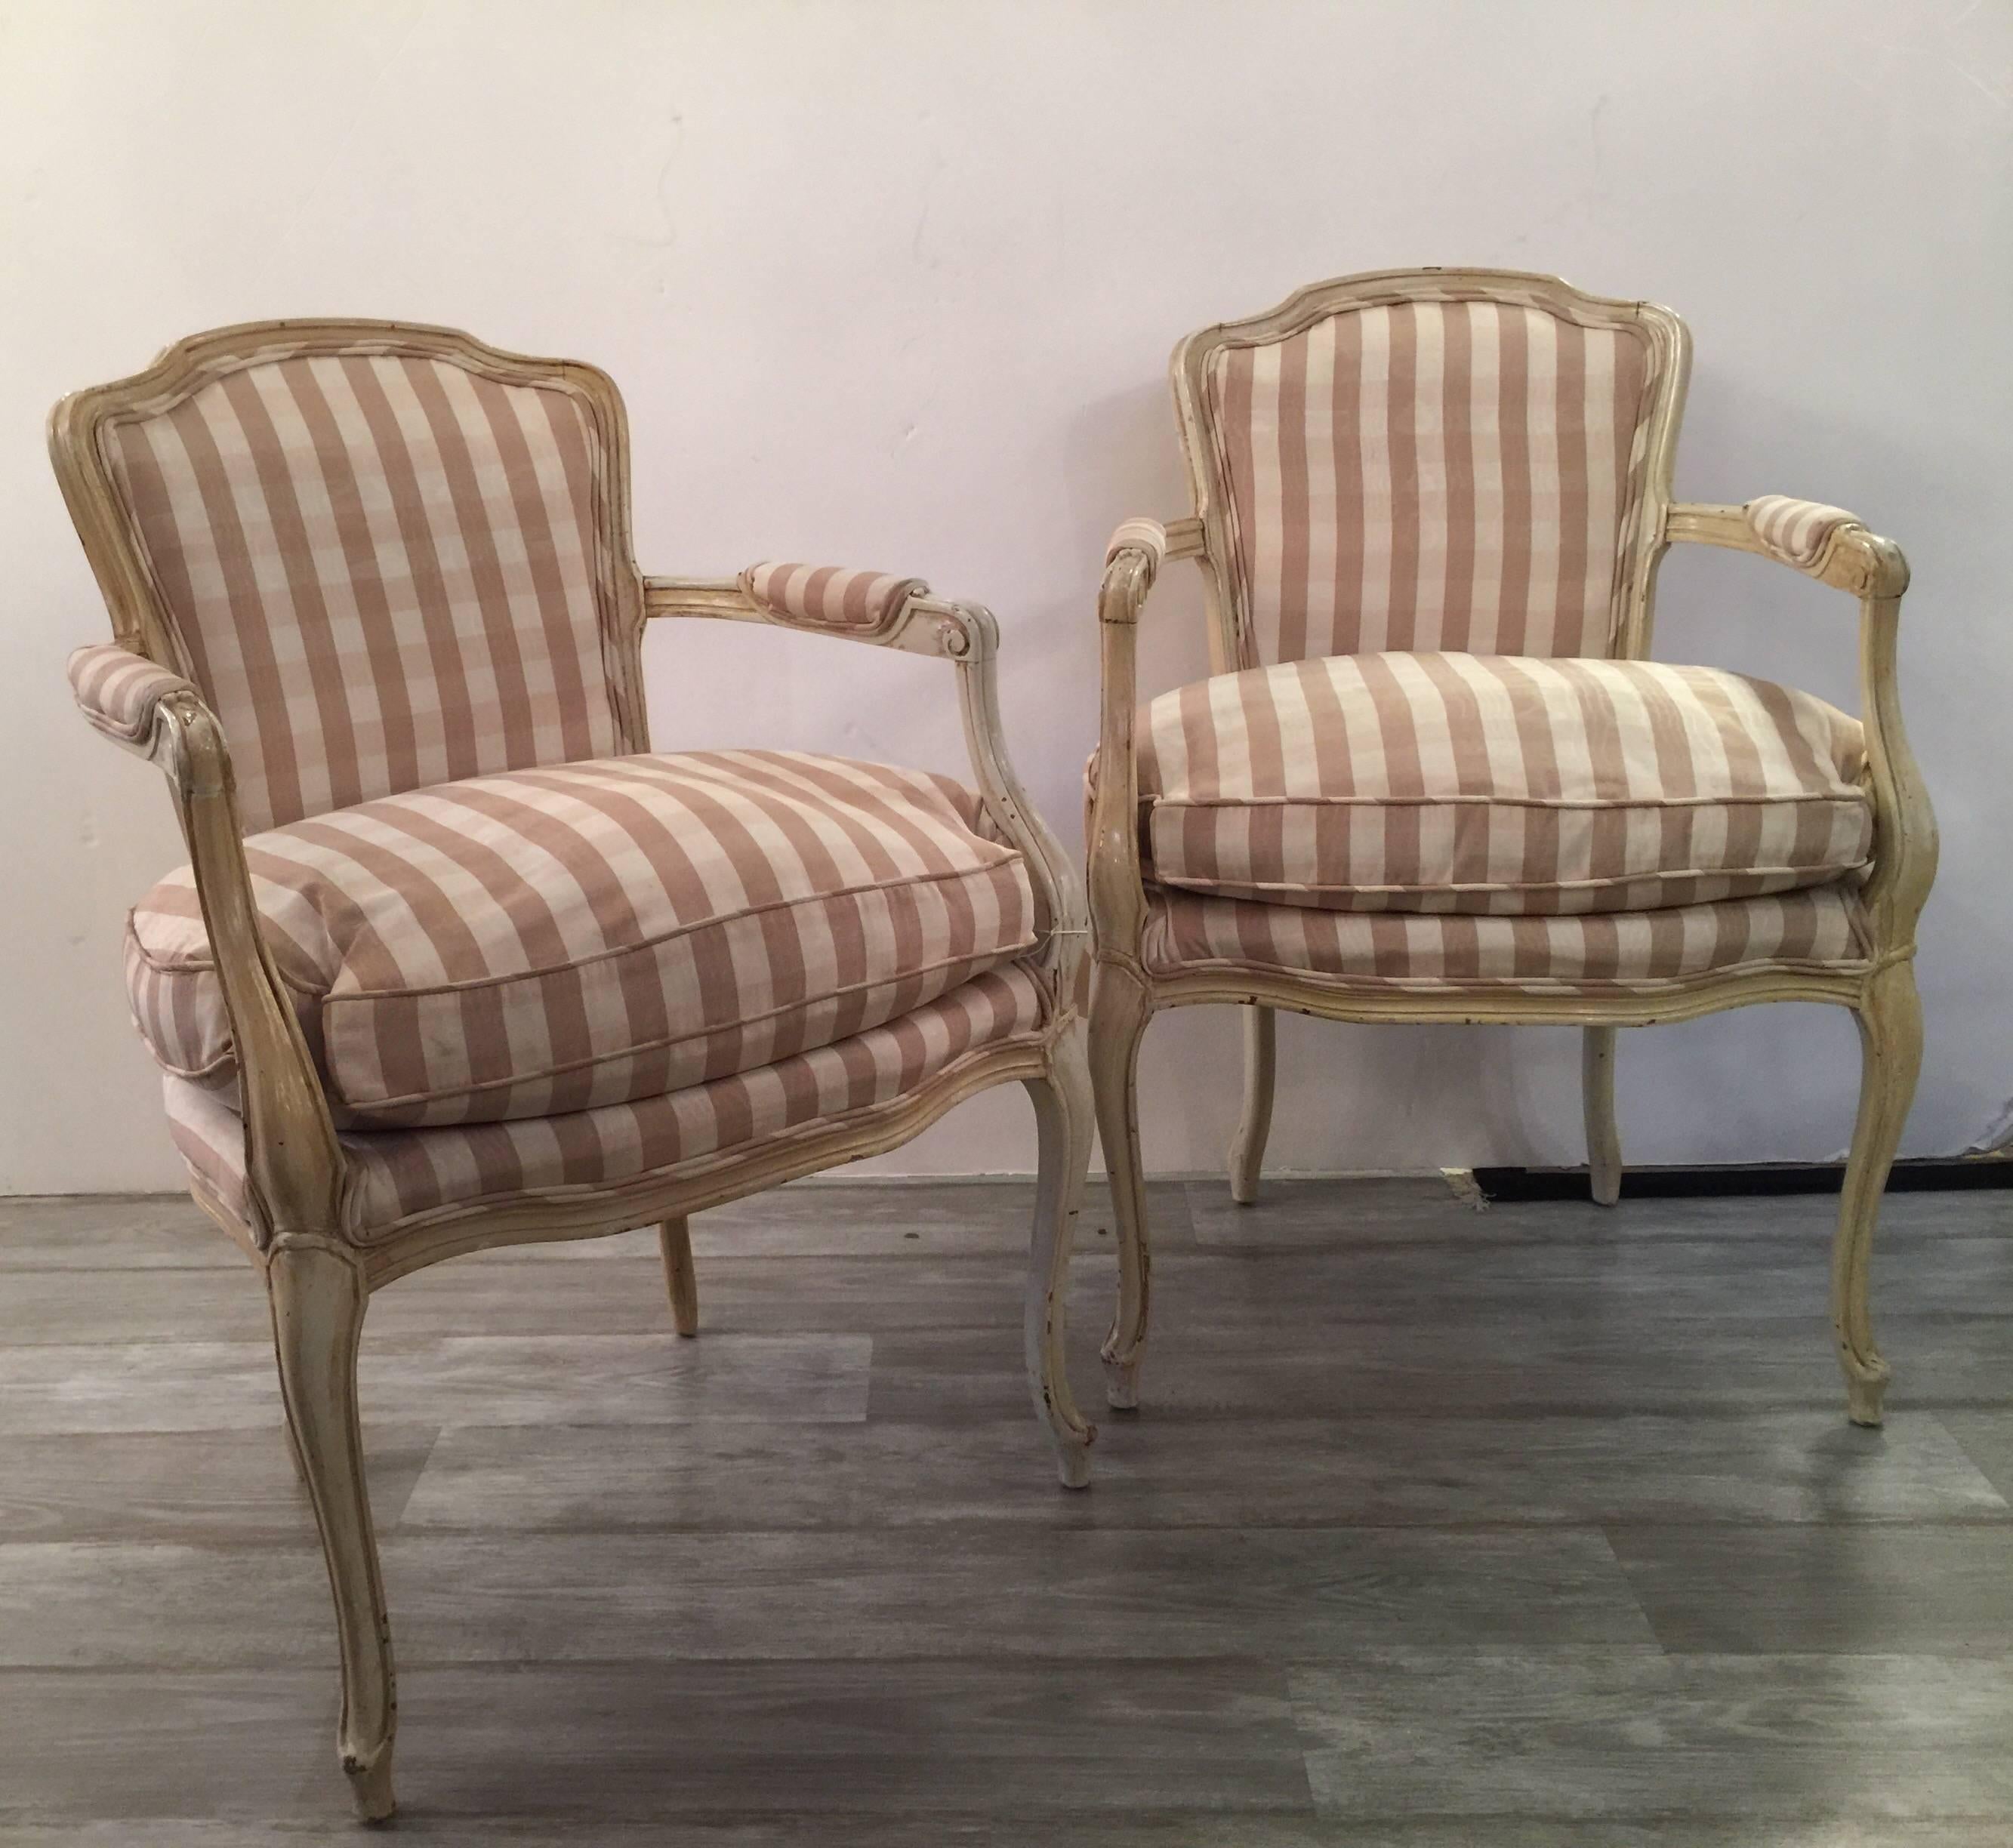 20th Century Pair of Louis XV Style Chairs